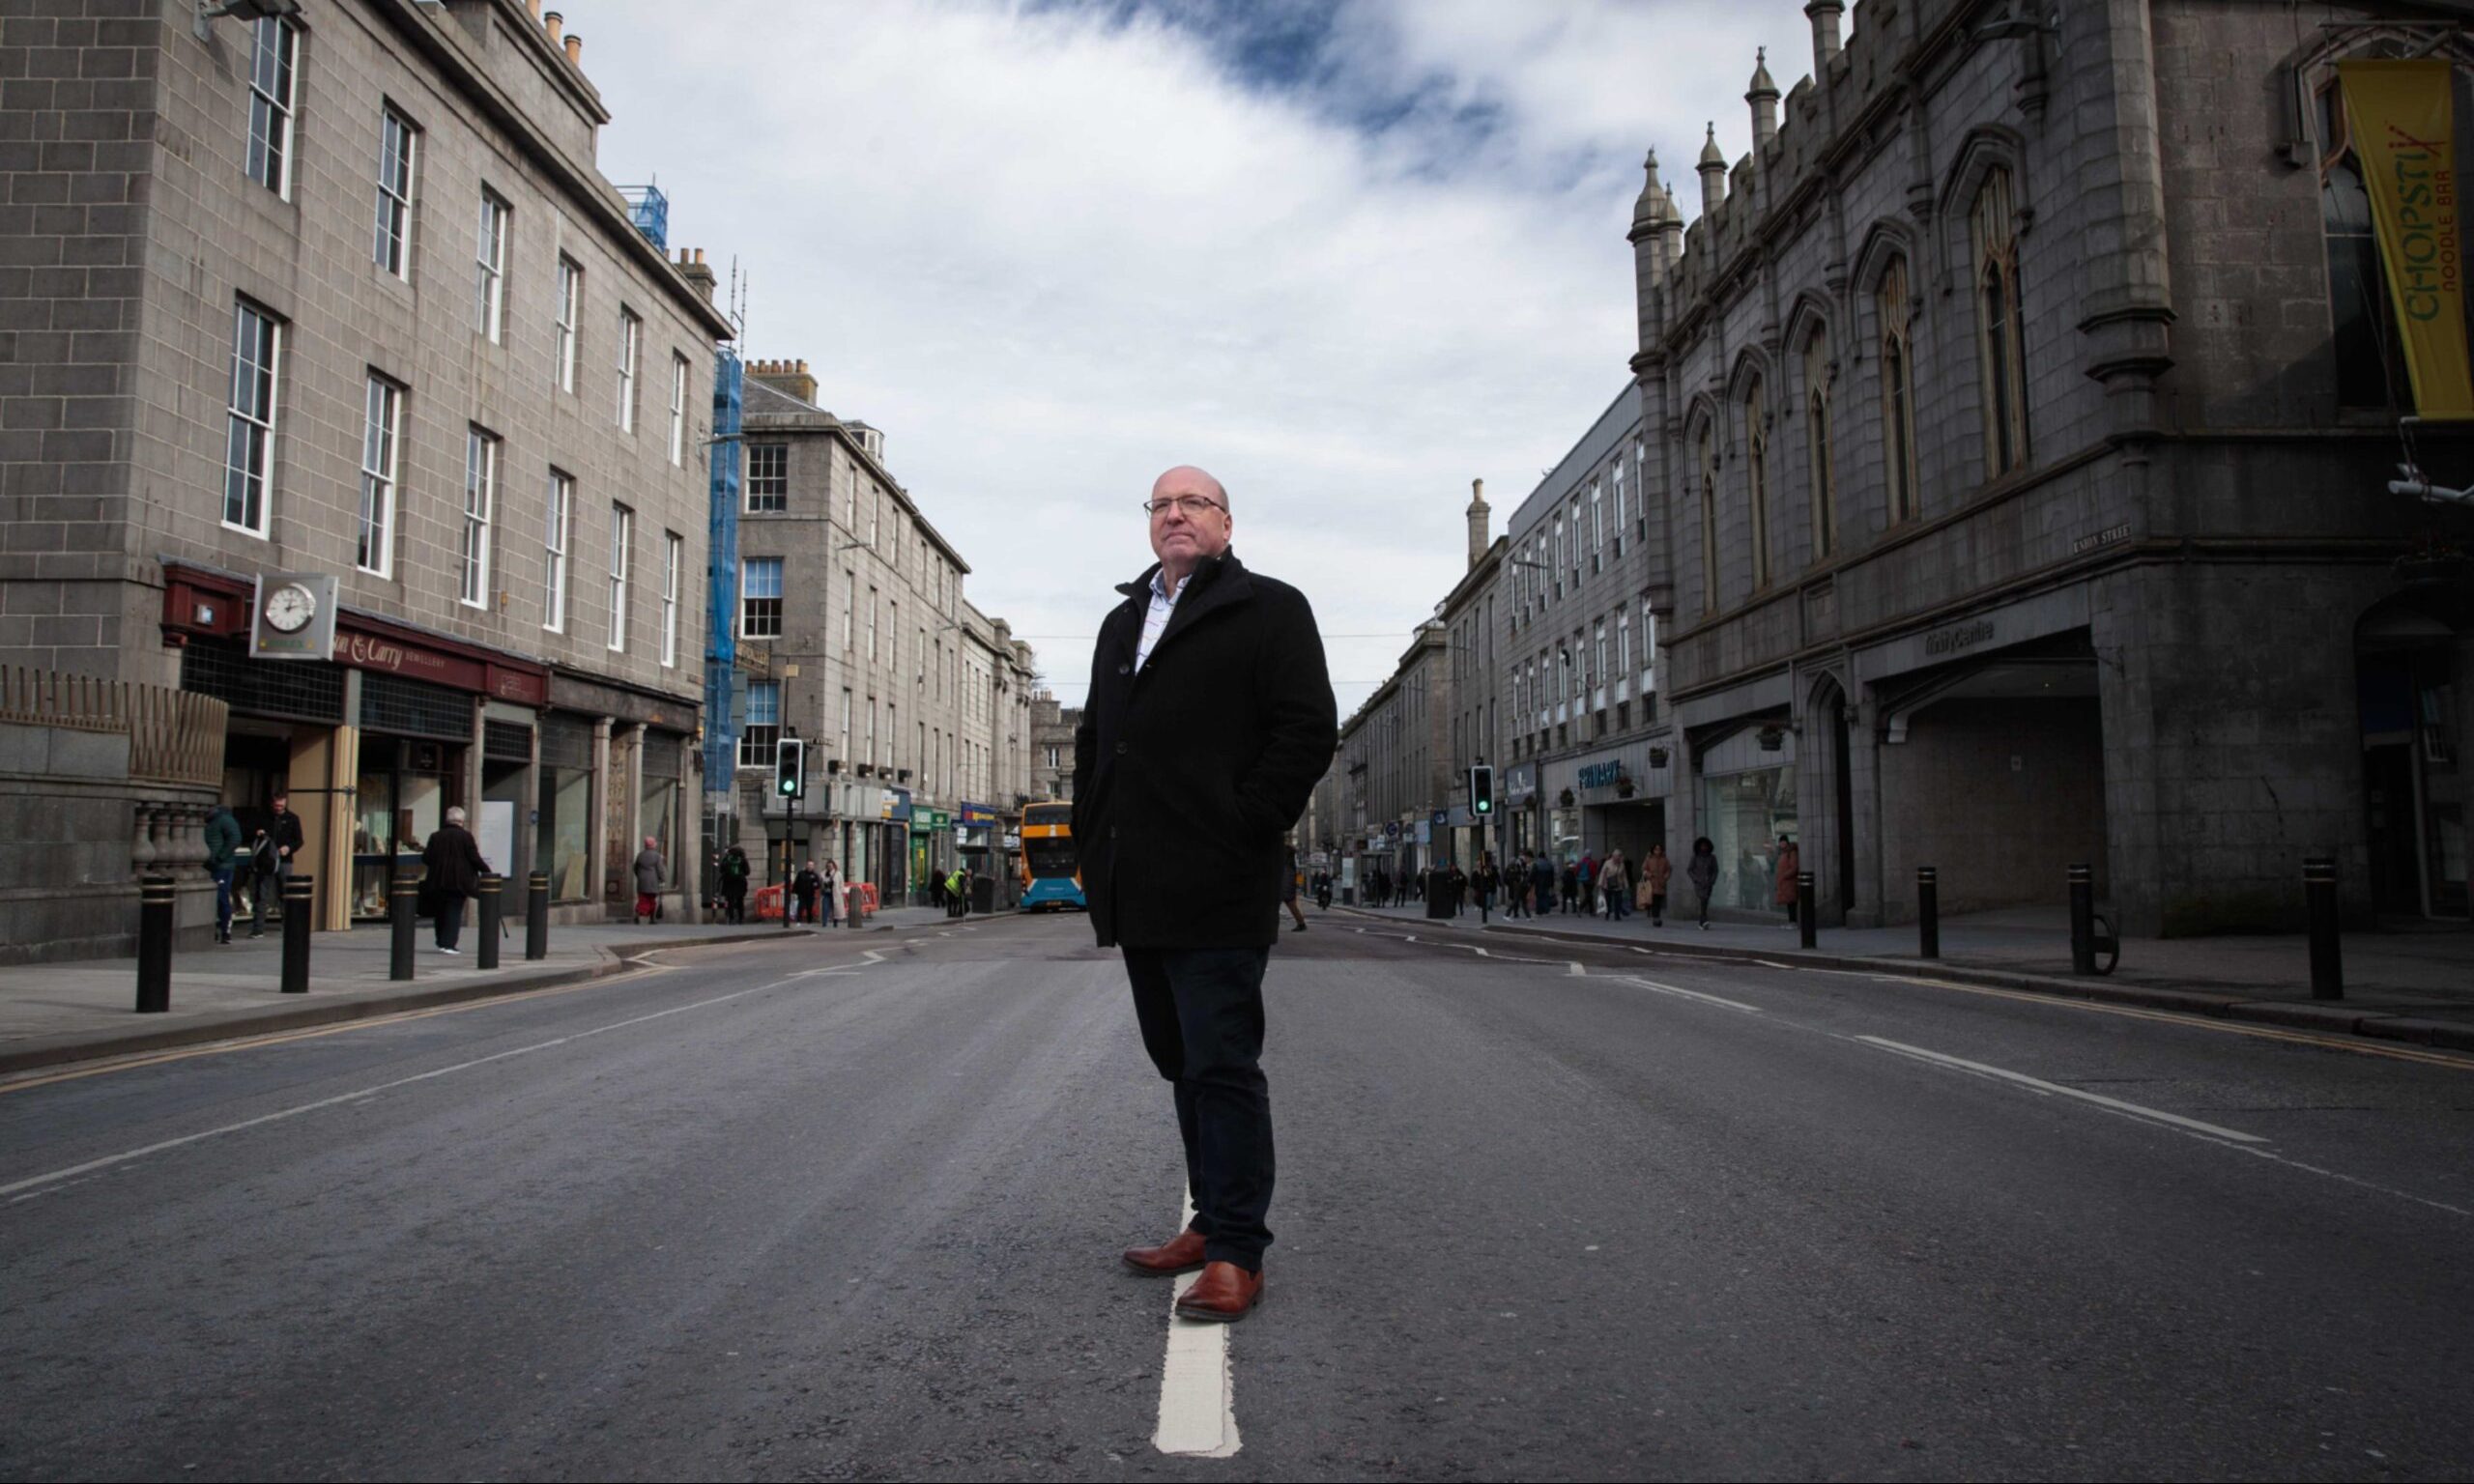 Bob Keiller, the leader of Our Union Street.